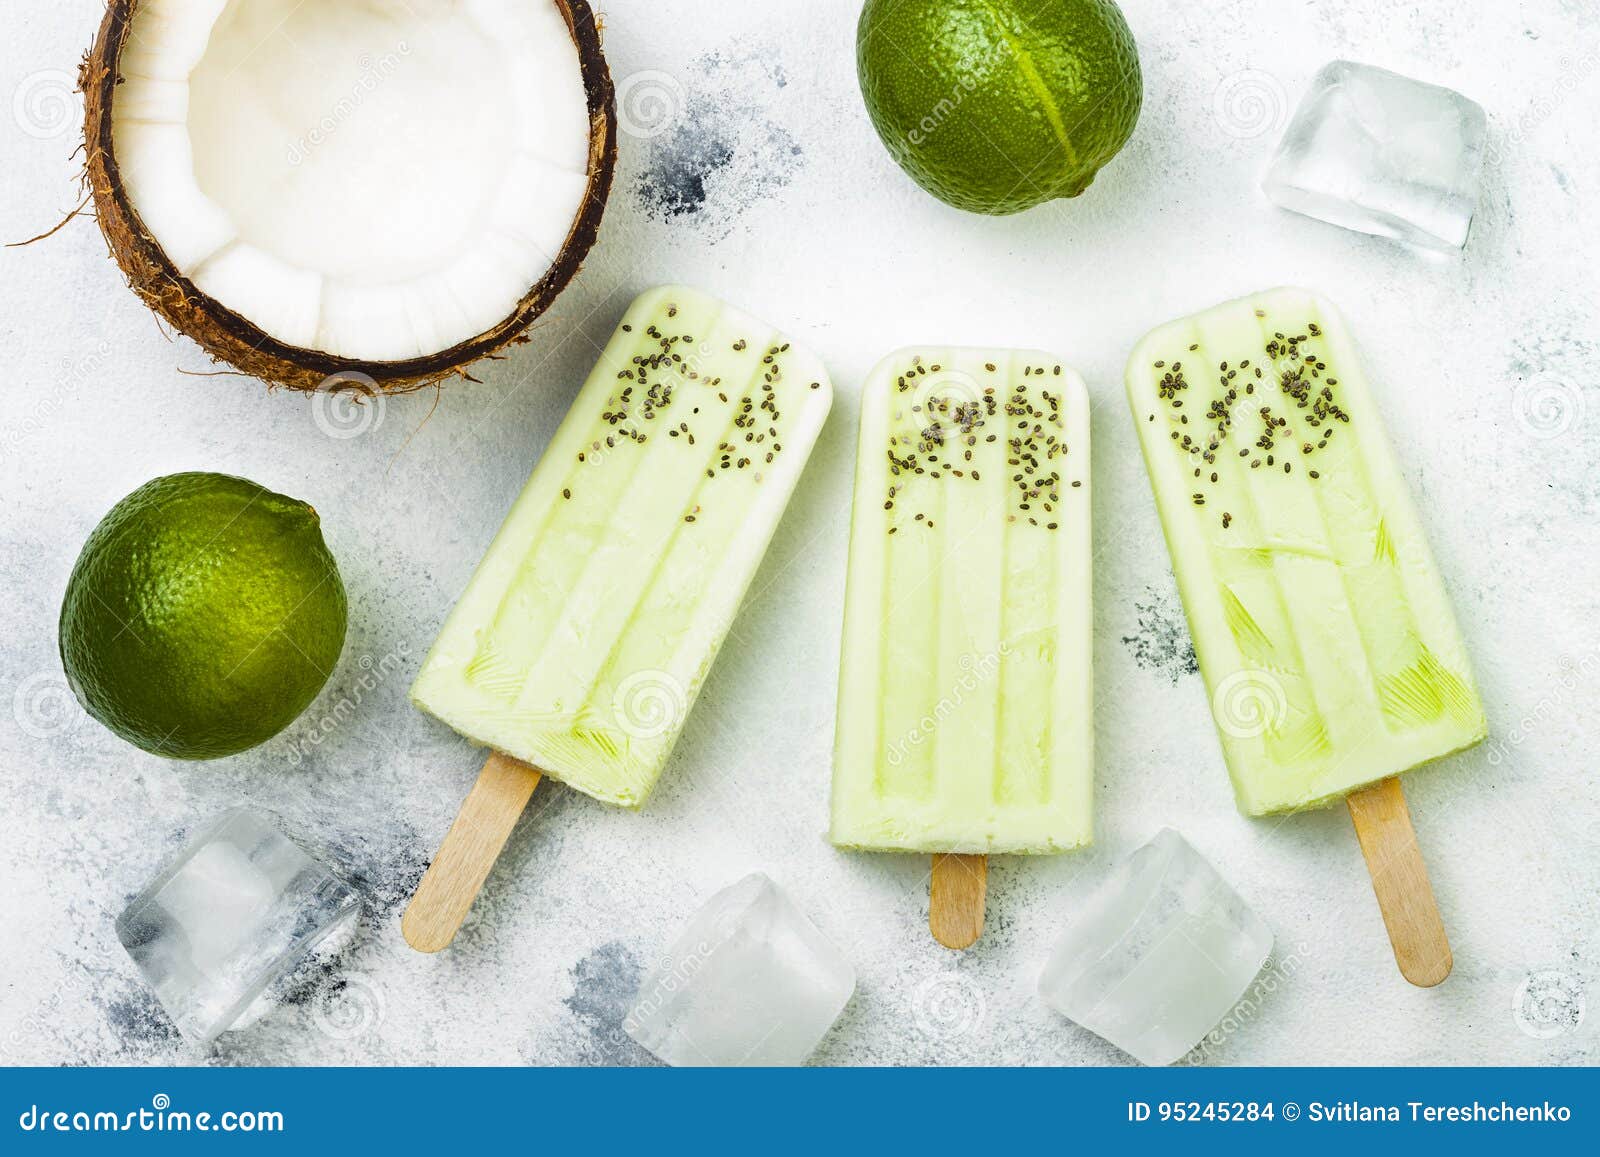 homemade vegan frozen coconut mojito popsicles - ice pops - paletas with chia seeds.